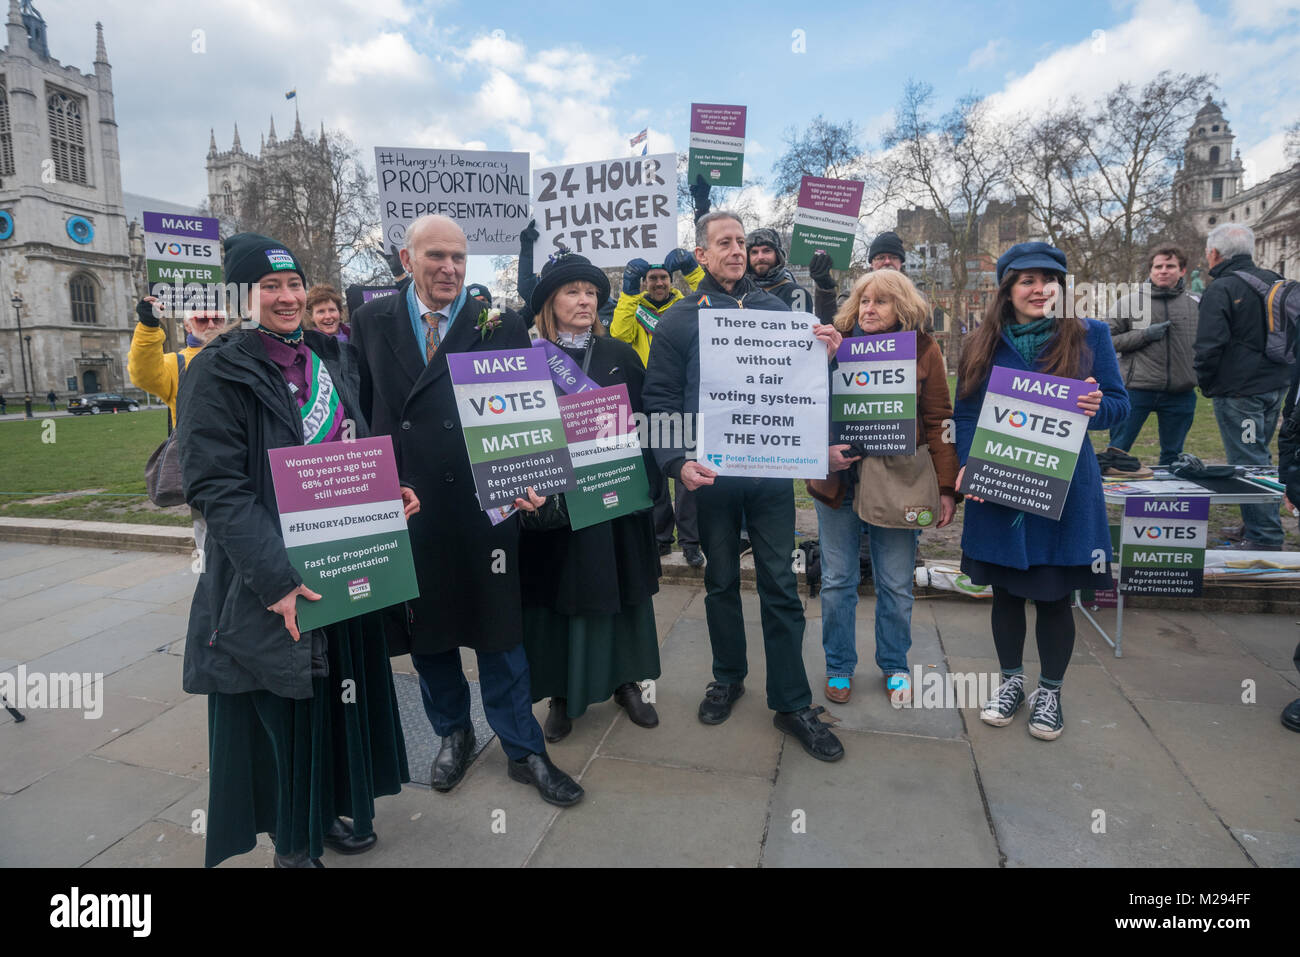 London, UK. 5 February 2018.  Campaigners, including VInce Cable and Peter Tatchell, pose in Parliament Square as hundreds of fair vote campaigners take part in a 24 hour hunger strike organised by Make Votes Matter (MVM) in protest against our dysfunctional electoral system and to urge Proportional Representation.  The event took place on the centenary of the 1918 the Representation of the People Act when for the first time some women and all men over 21 in the UK gained the right to vote. MVM point out that although now everyone can vote, for over two thirds of us our vote has no effect on t Stock Photo